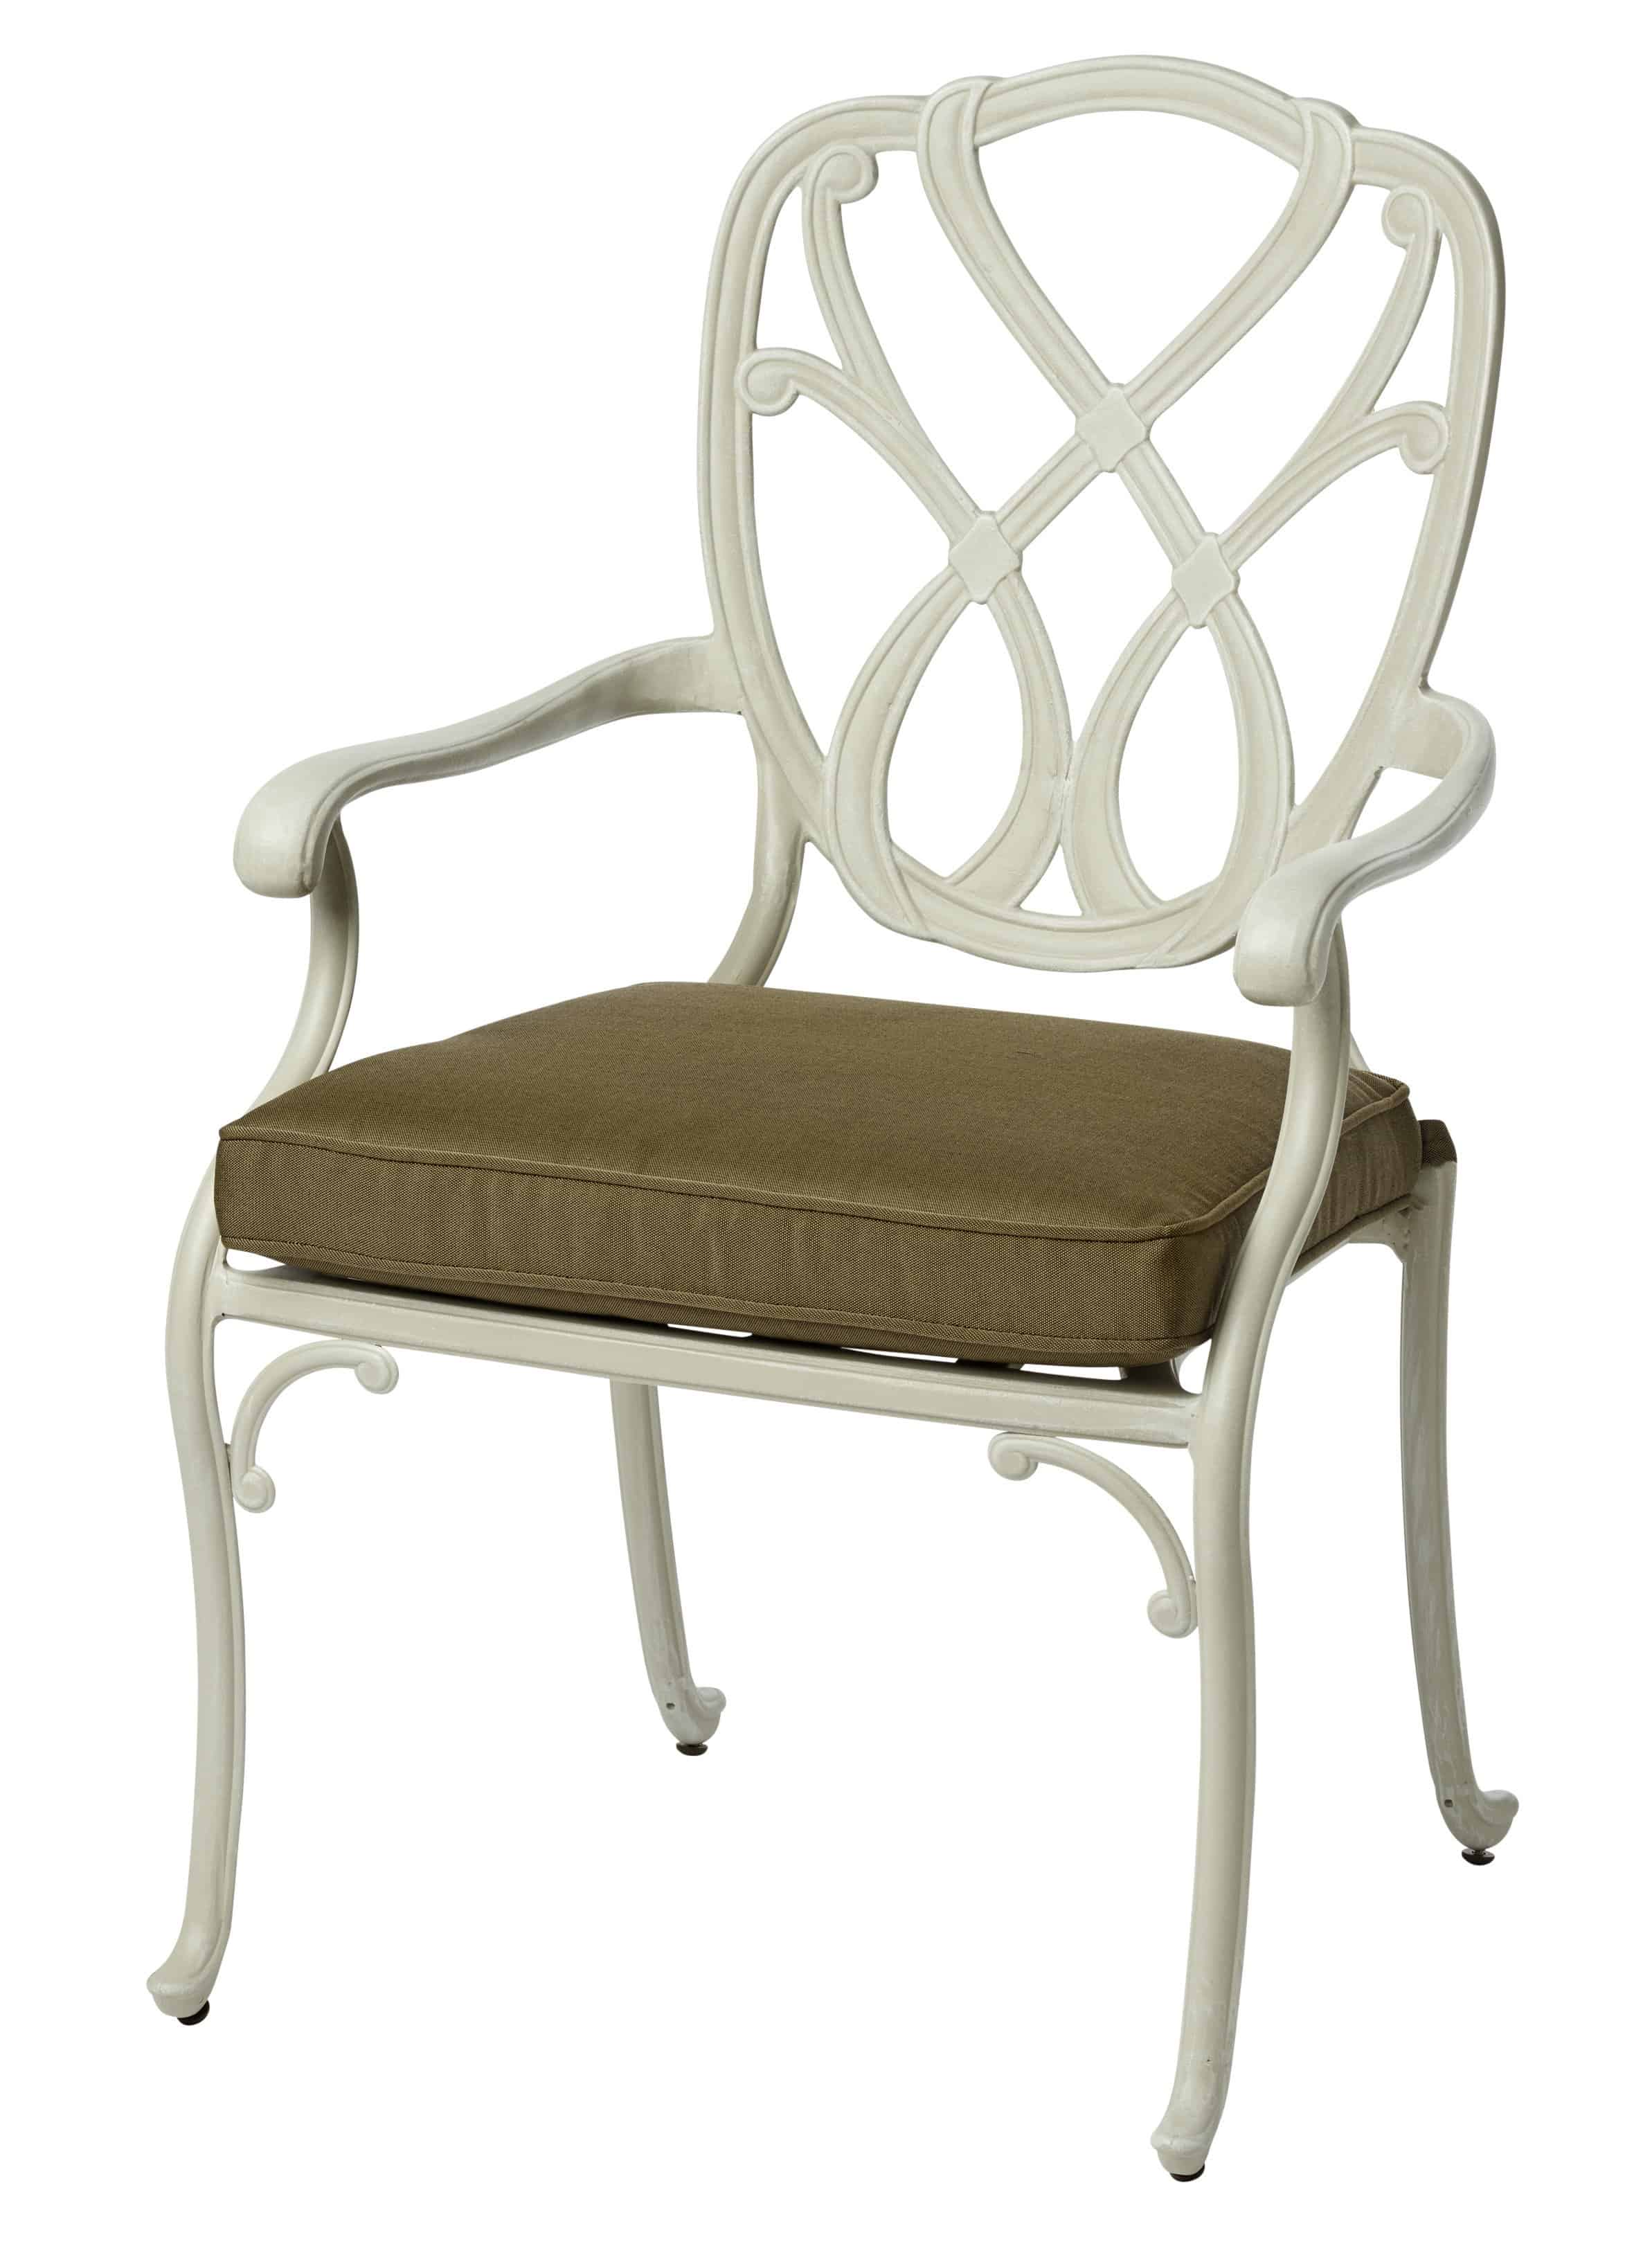 Melton Craft Capri Chair with Cushion - Tucker Barbecues